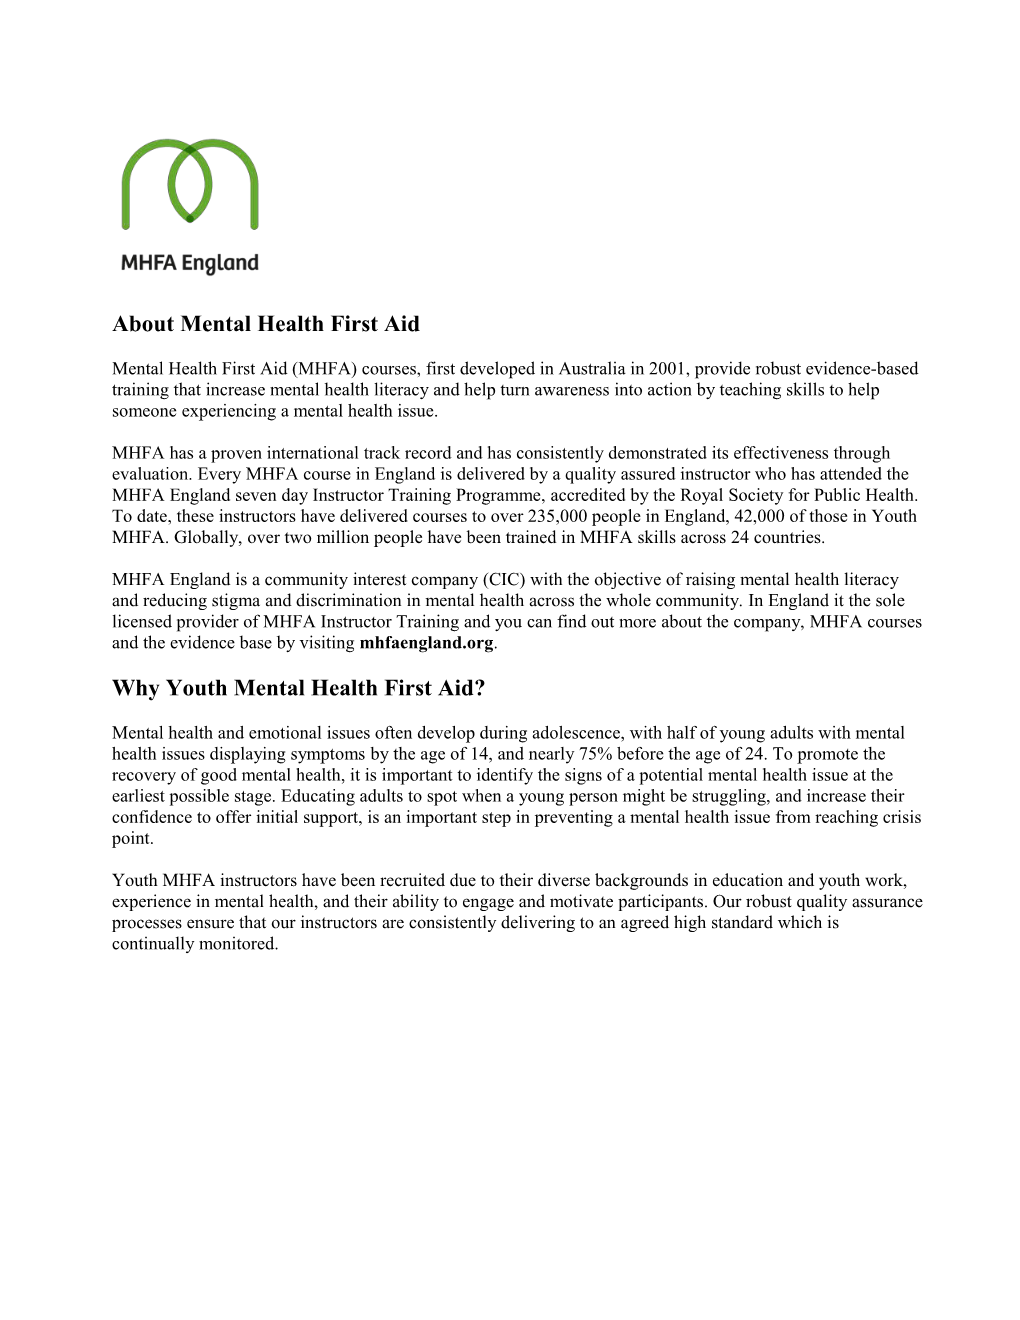 About Mental Health First Aid Mental Health First Aid (MHFA) Courses, First Developed